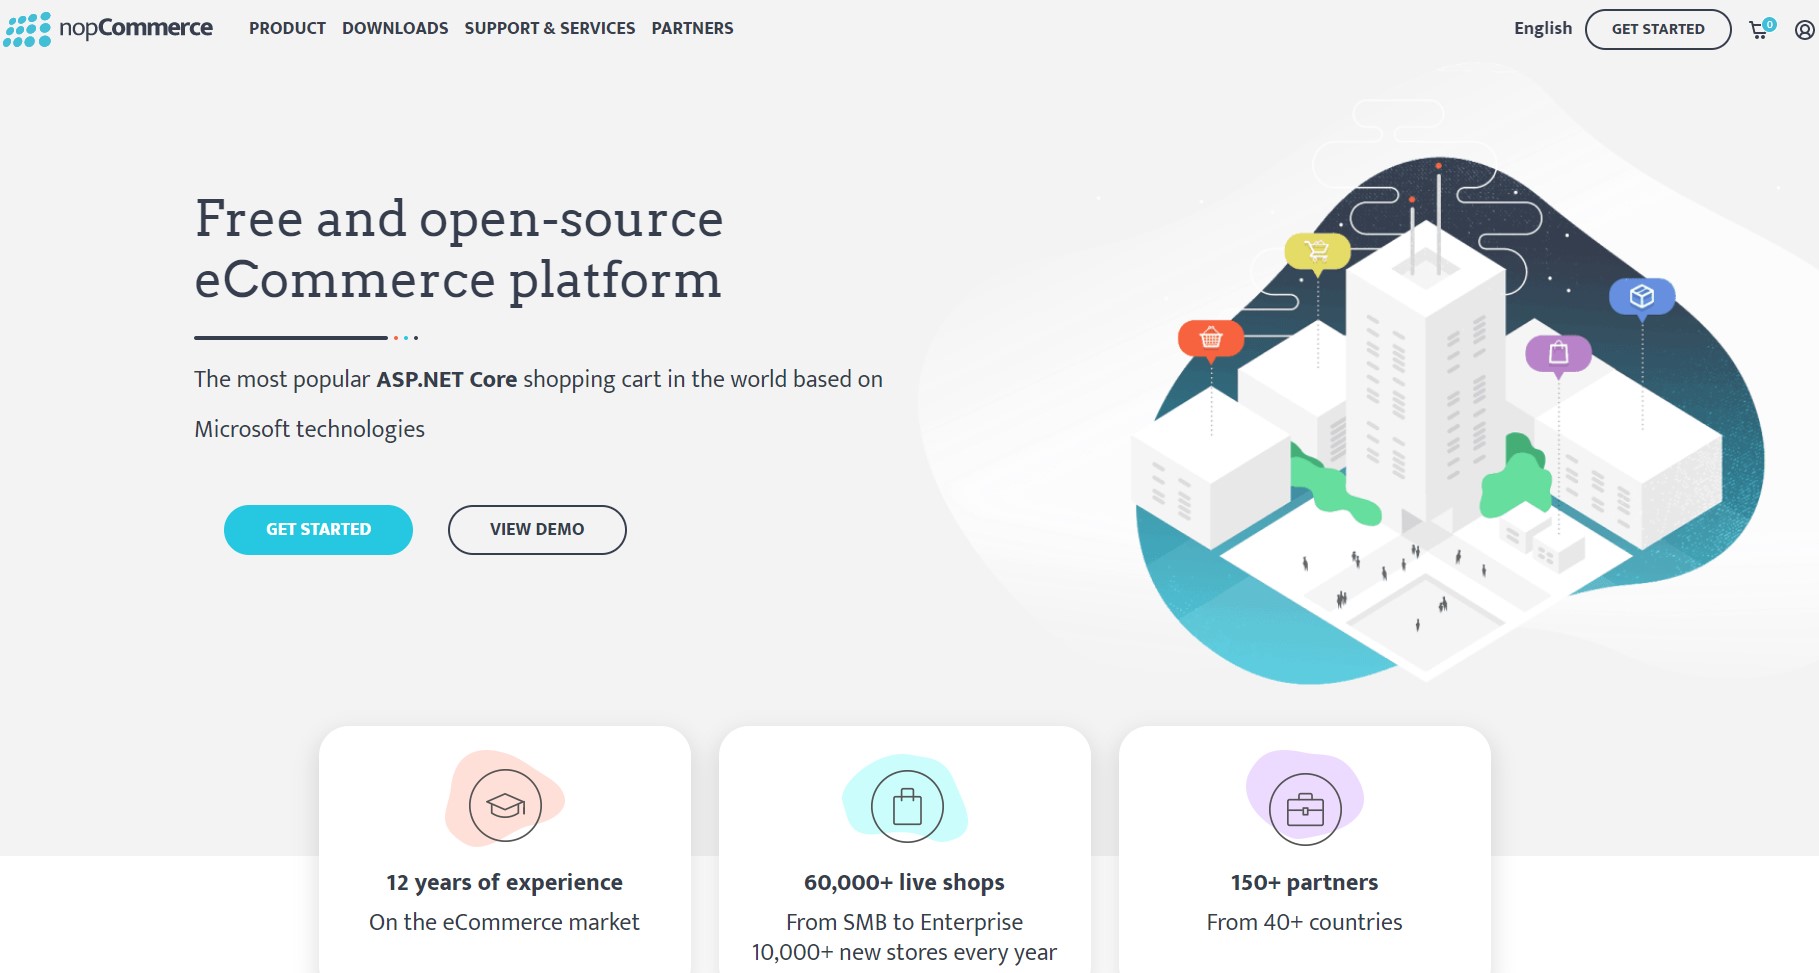 nopcommerce-create-complex-applications-for-small-business owners